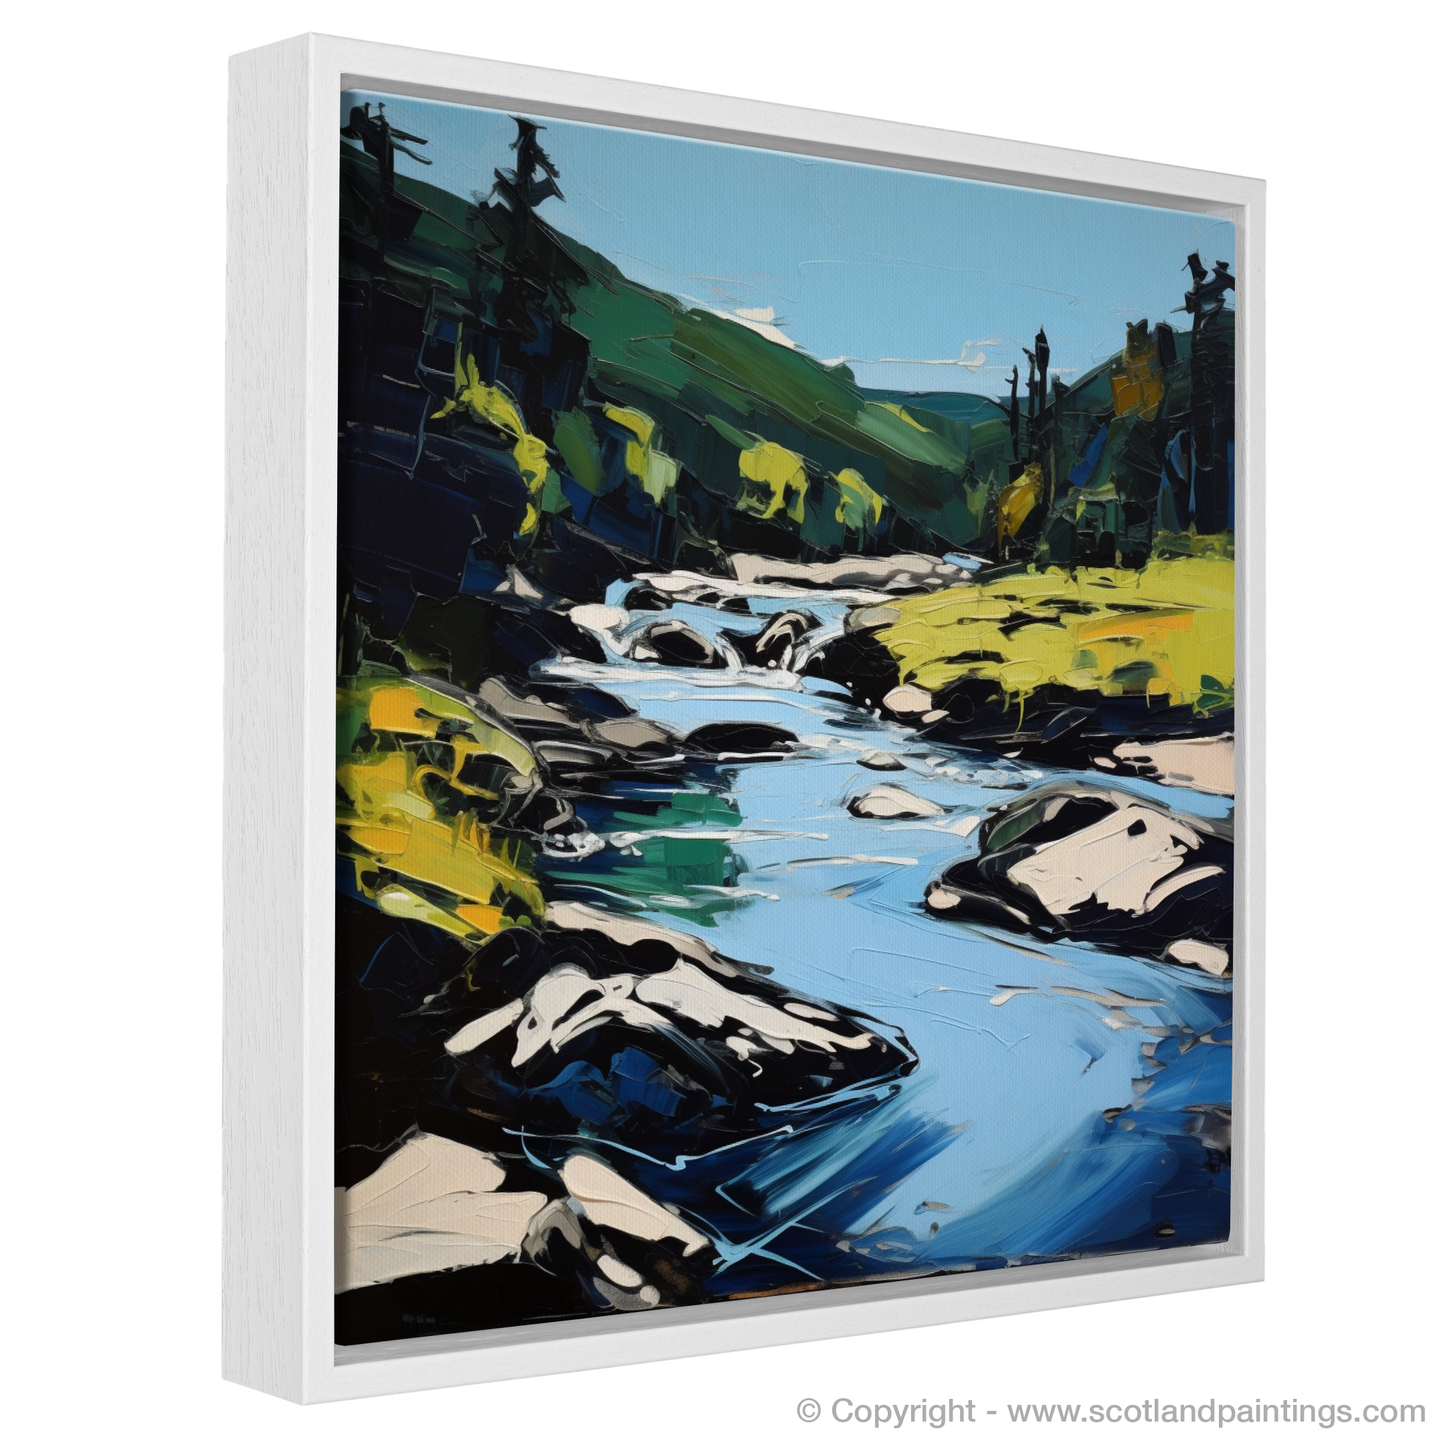 Painting and Art Print of River Garry, Highlands in summer entitled "Summer Rush of River Garry Highlands".